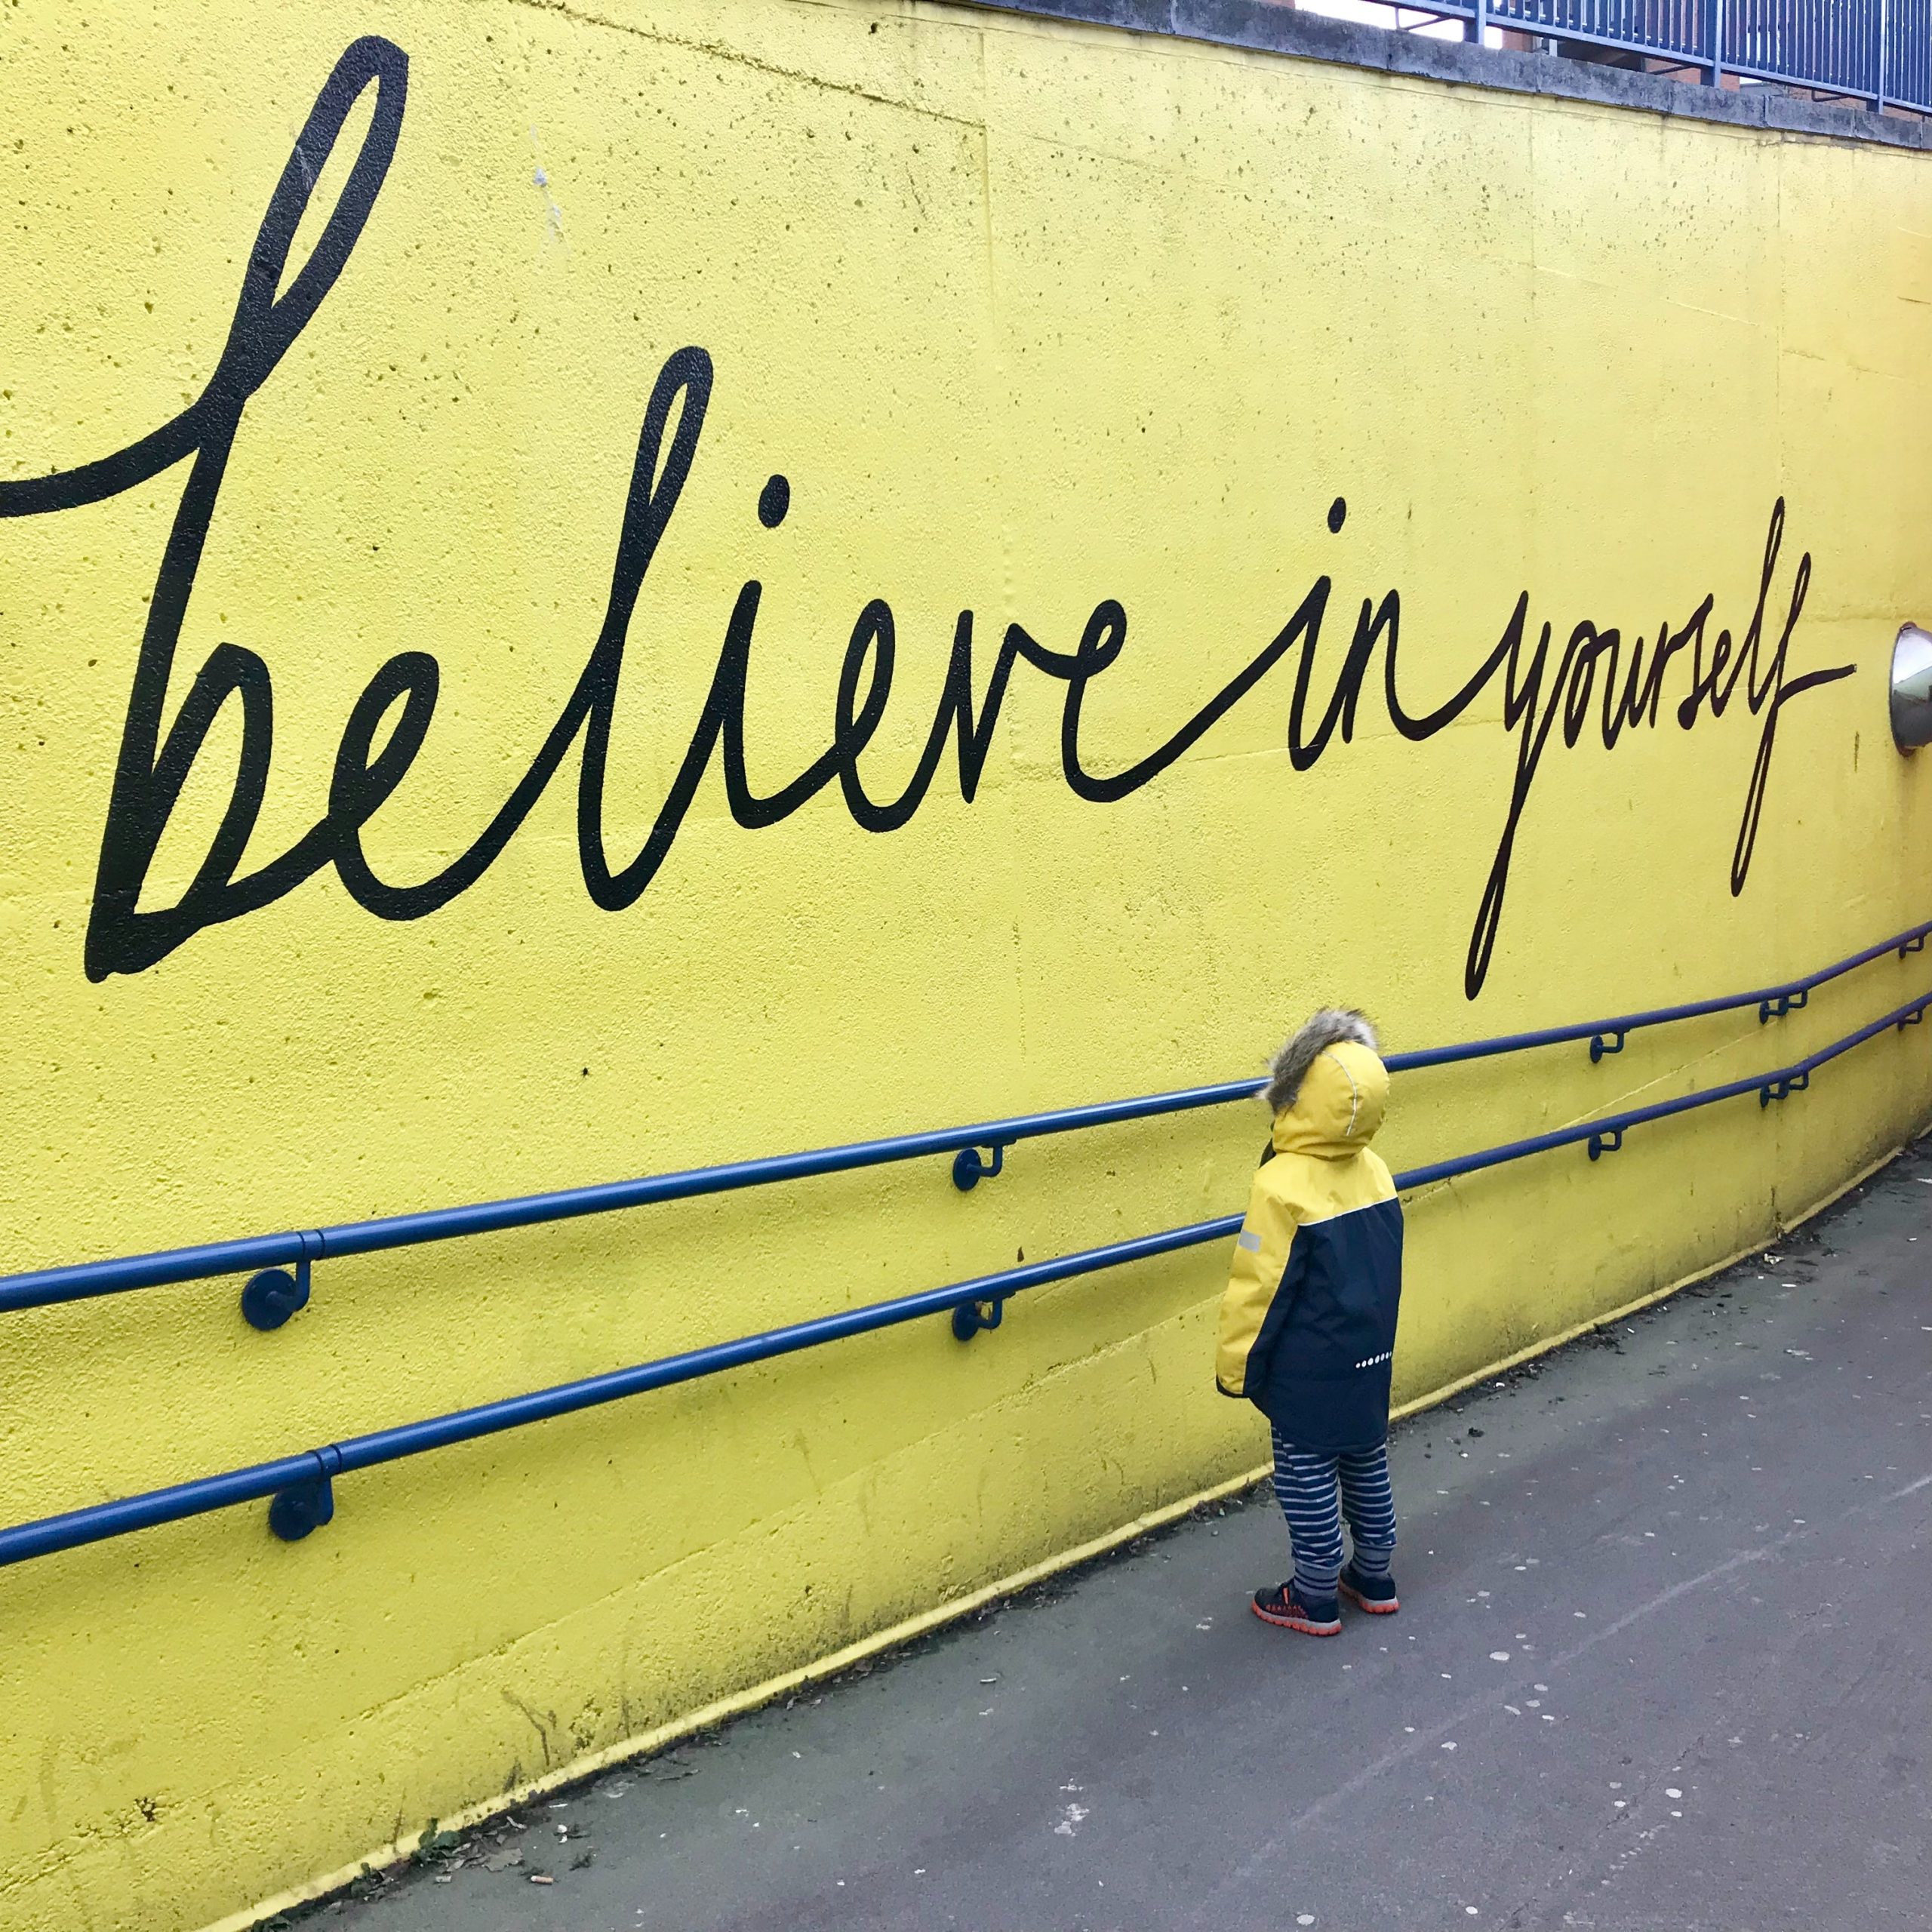 Driving Test Mallow showing a boy looking at yellow wall with believe in yourself graffiti